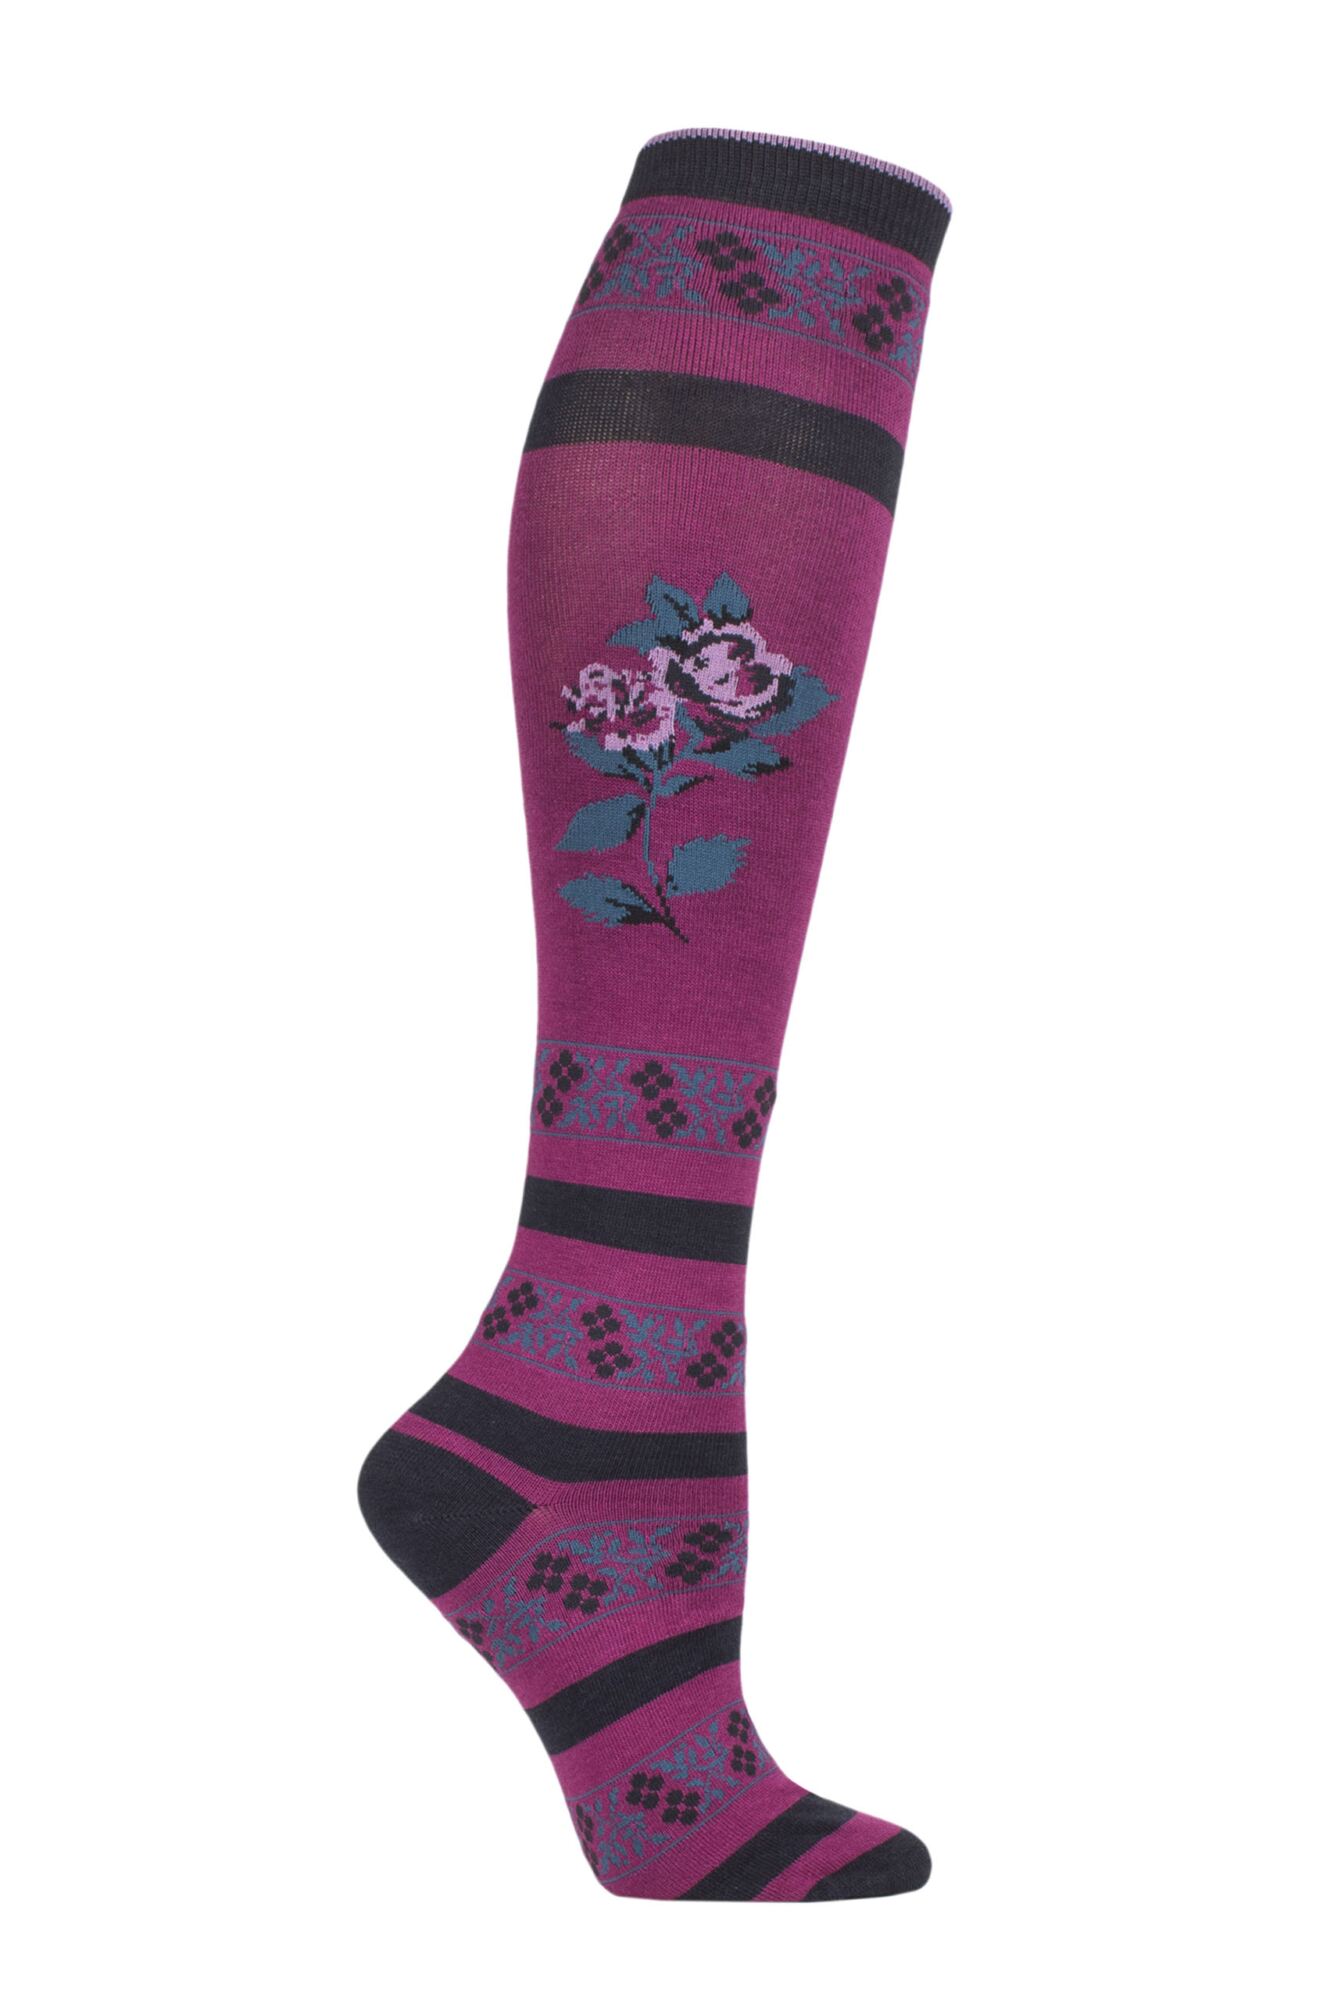 Ladies 1 Pair Thought Denise Floral Bamboo and Organic Cotton Knee High Socks